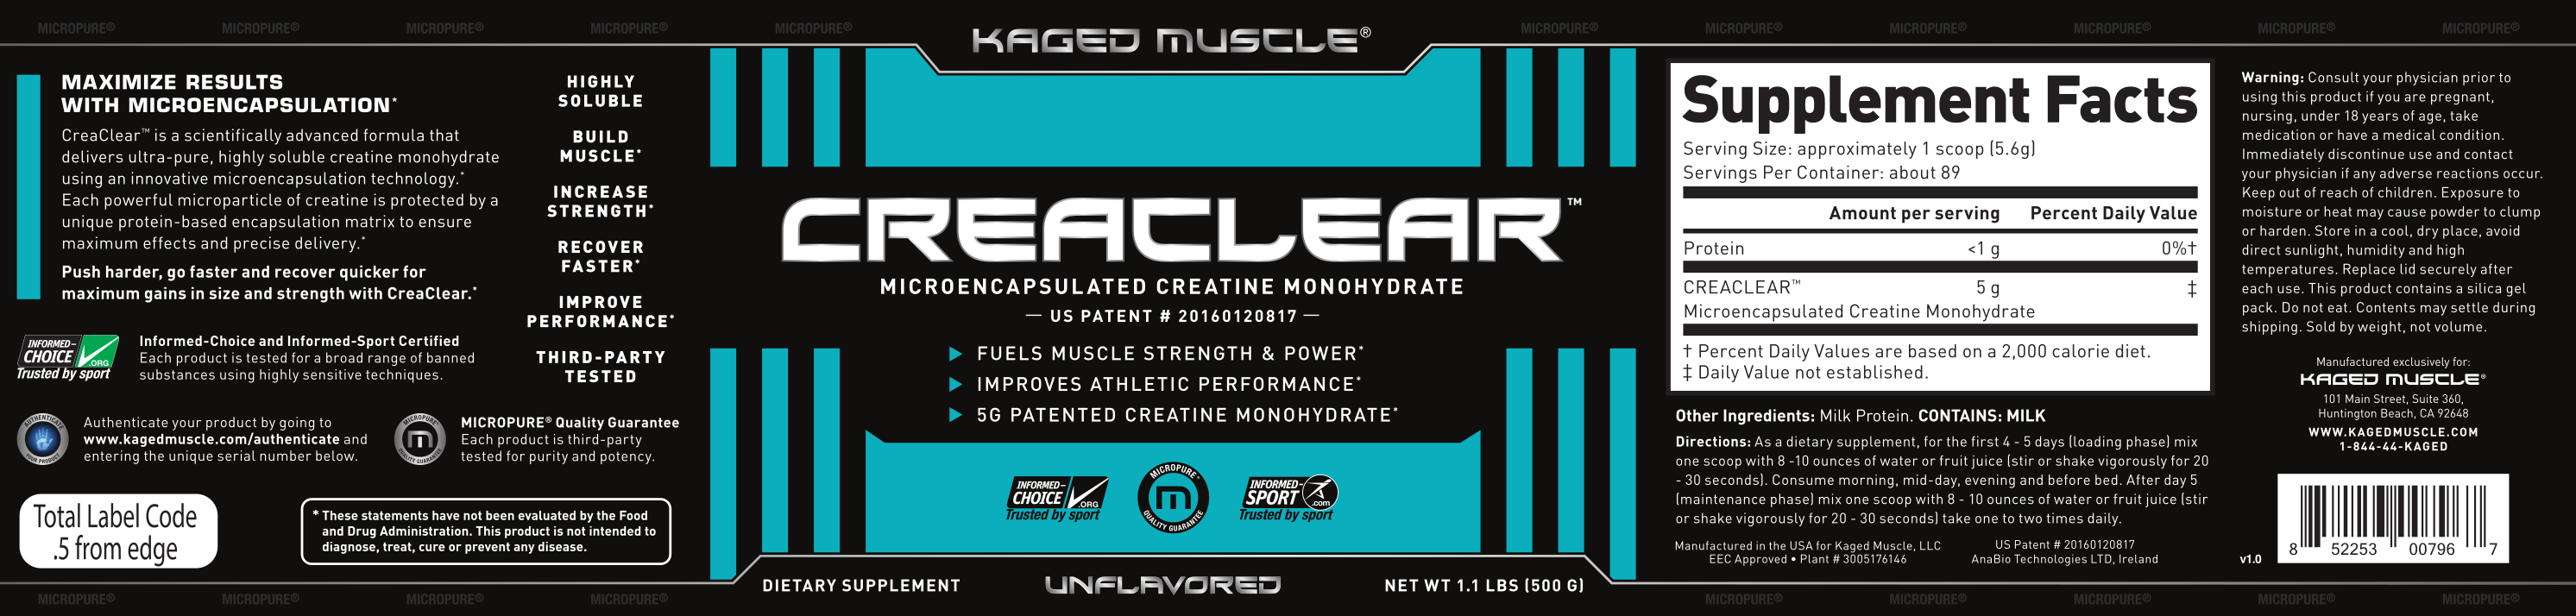 Kaged Muscle CreaClear Label